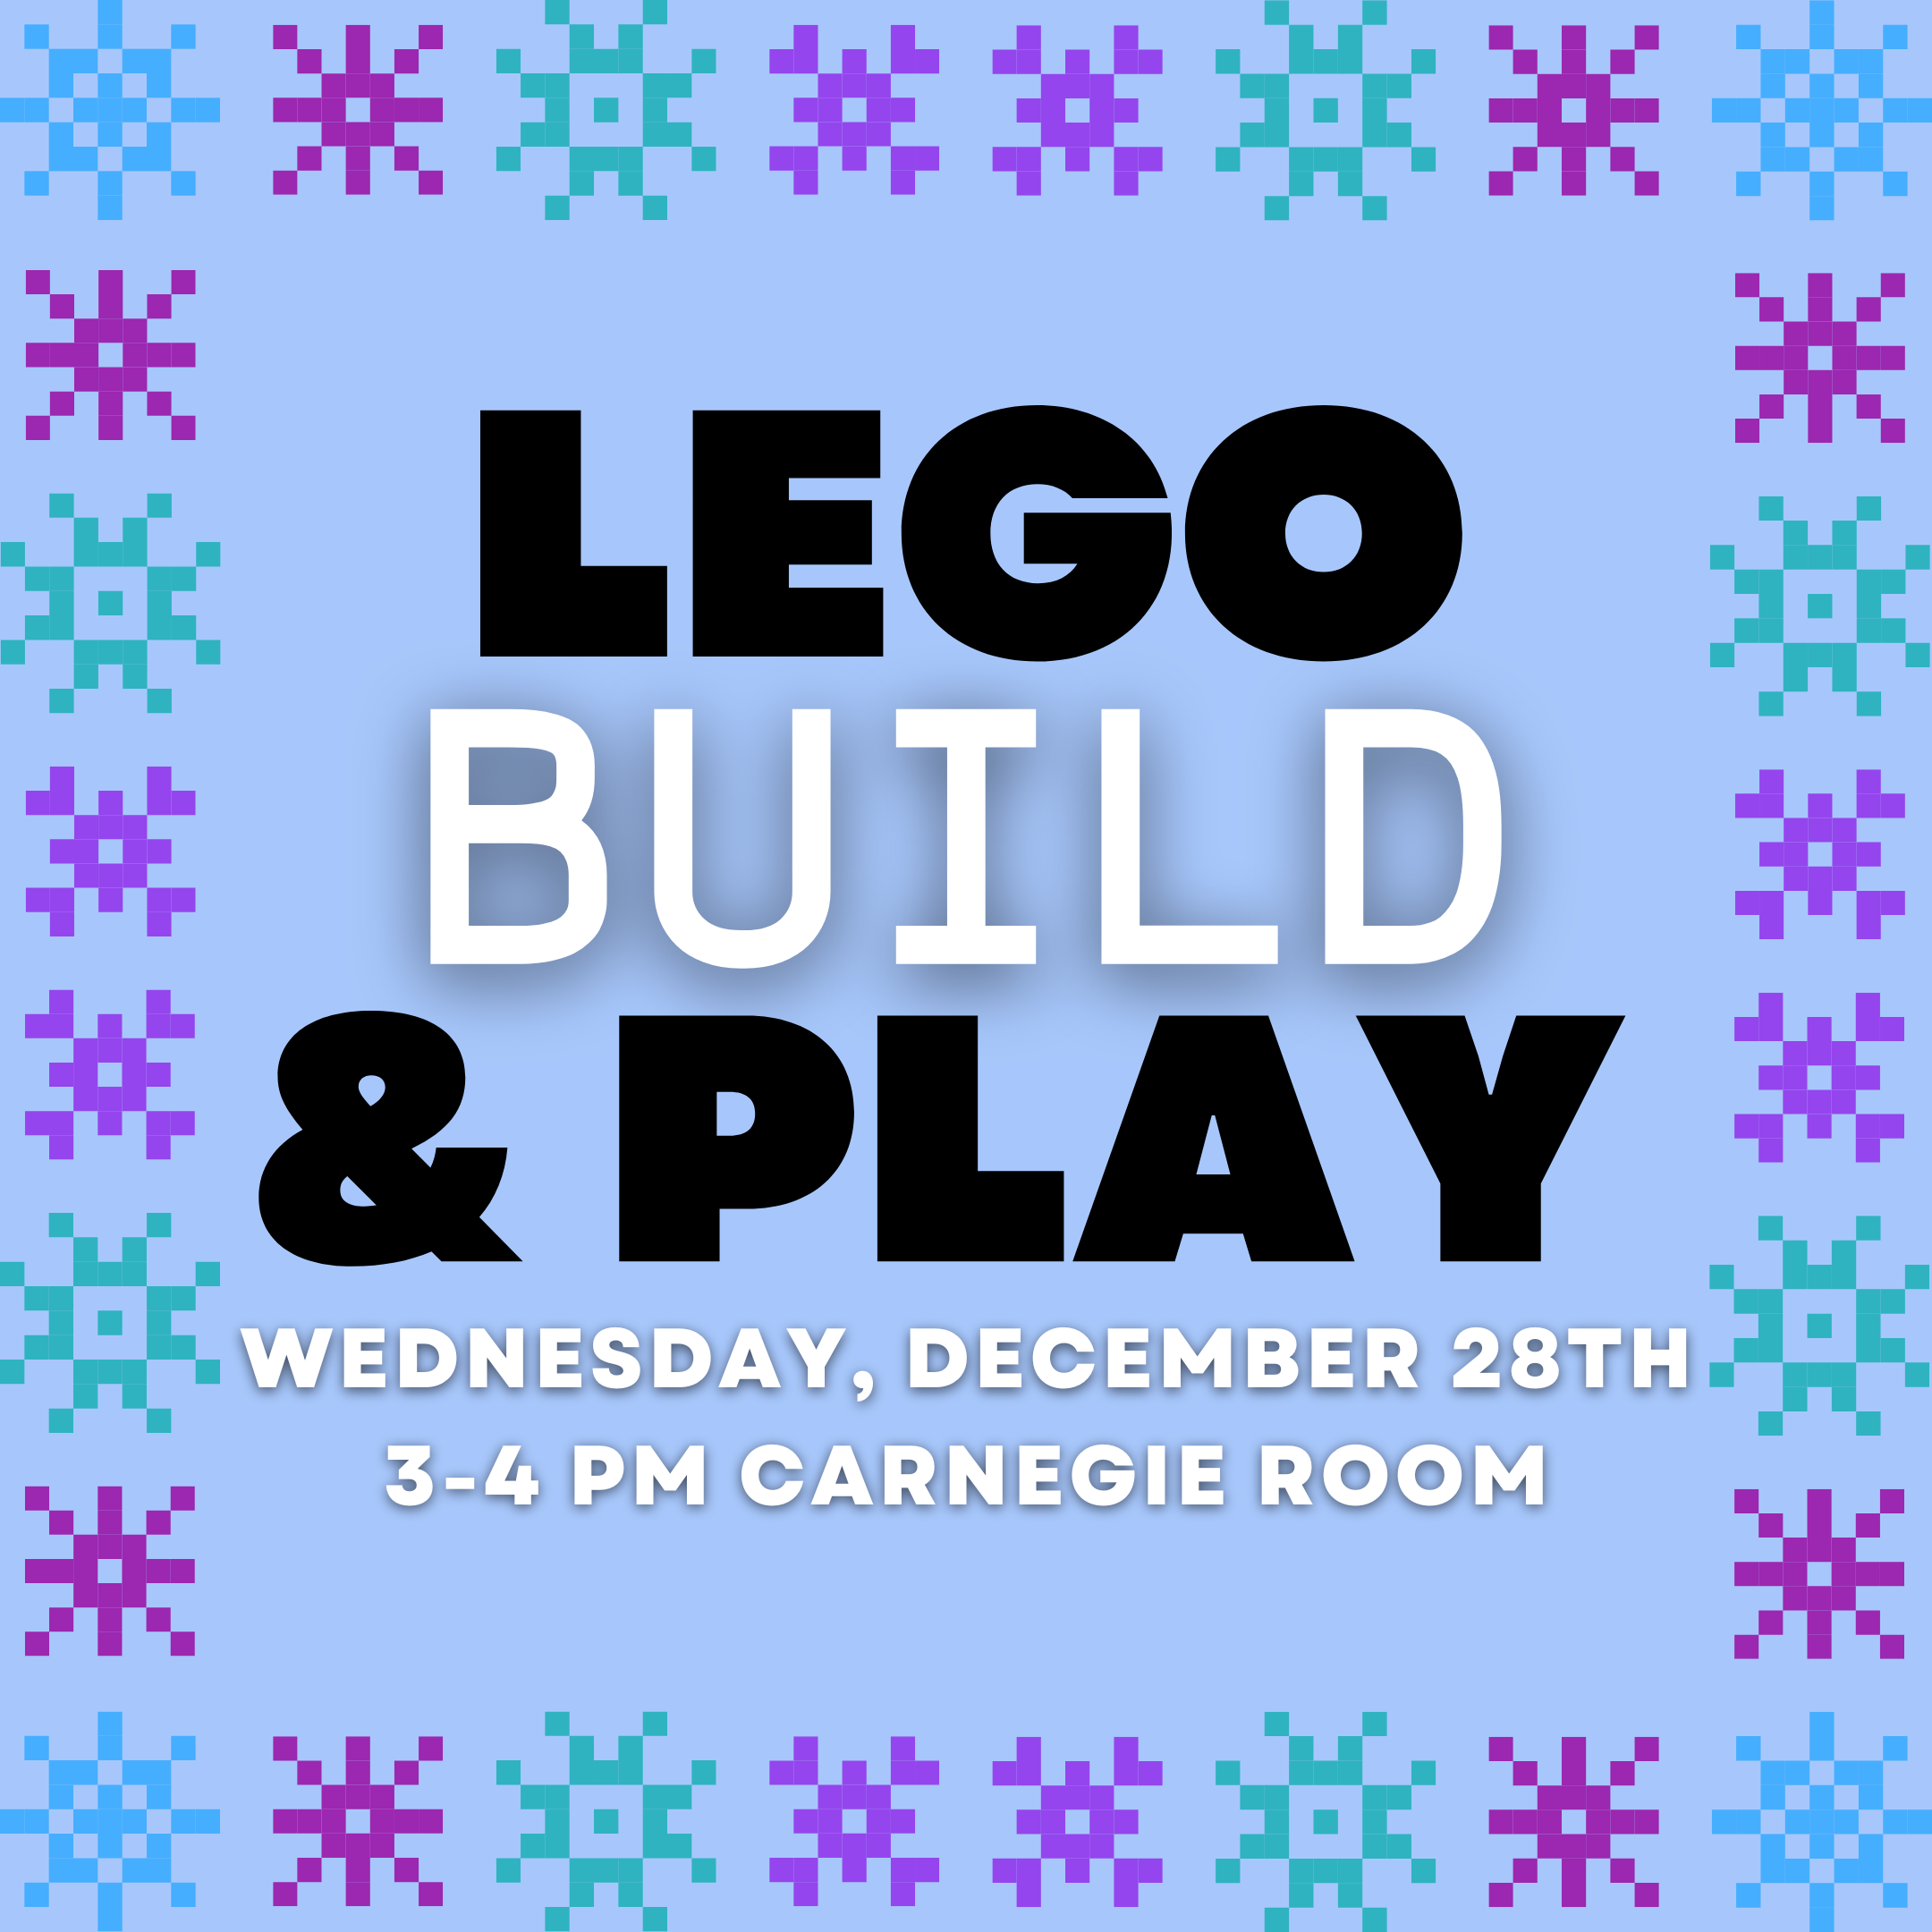 LEGO Build & Play Wednesday, December 28 3-4 PM Carnegie Room